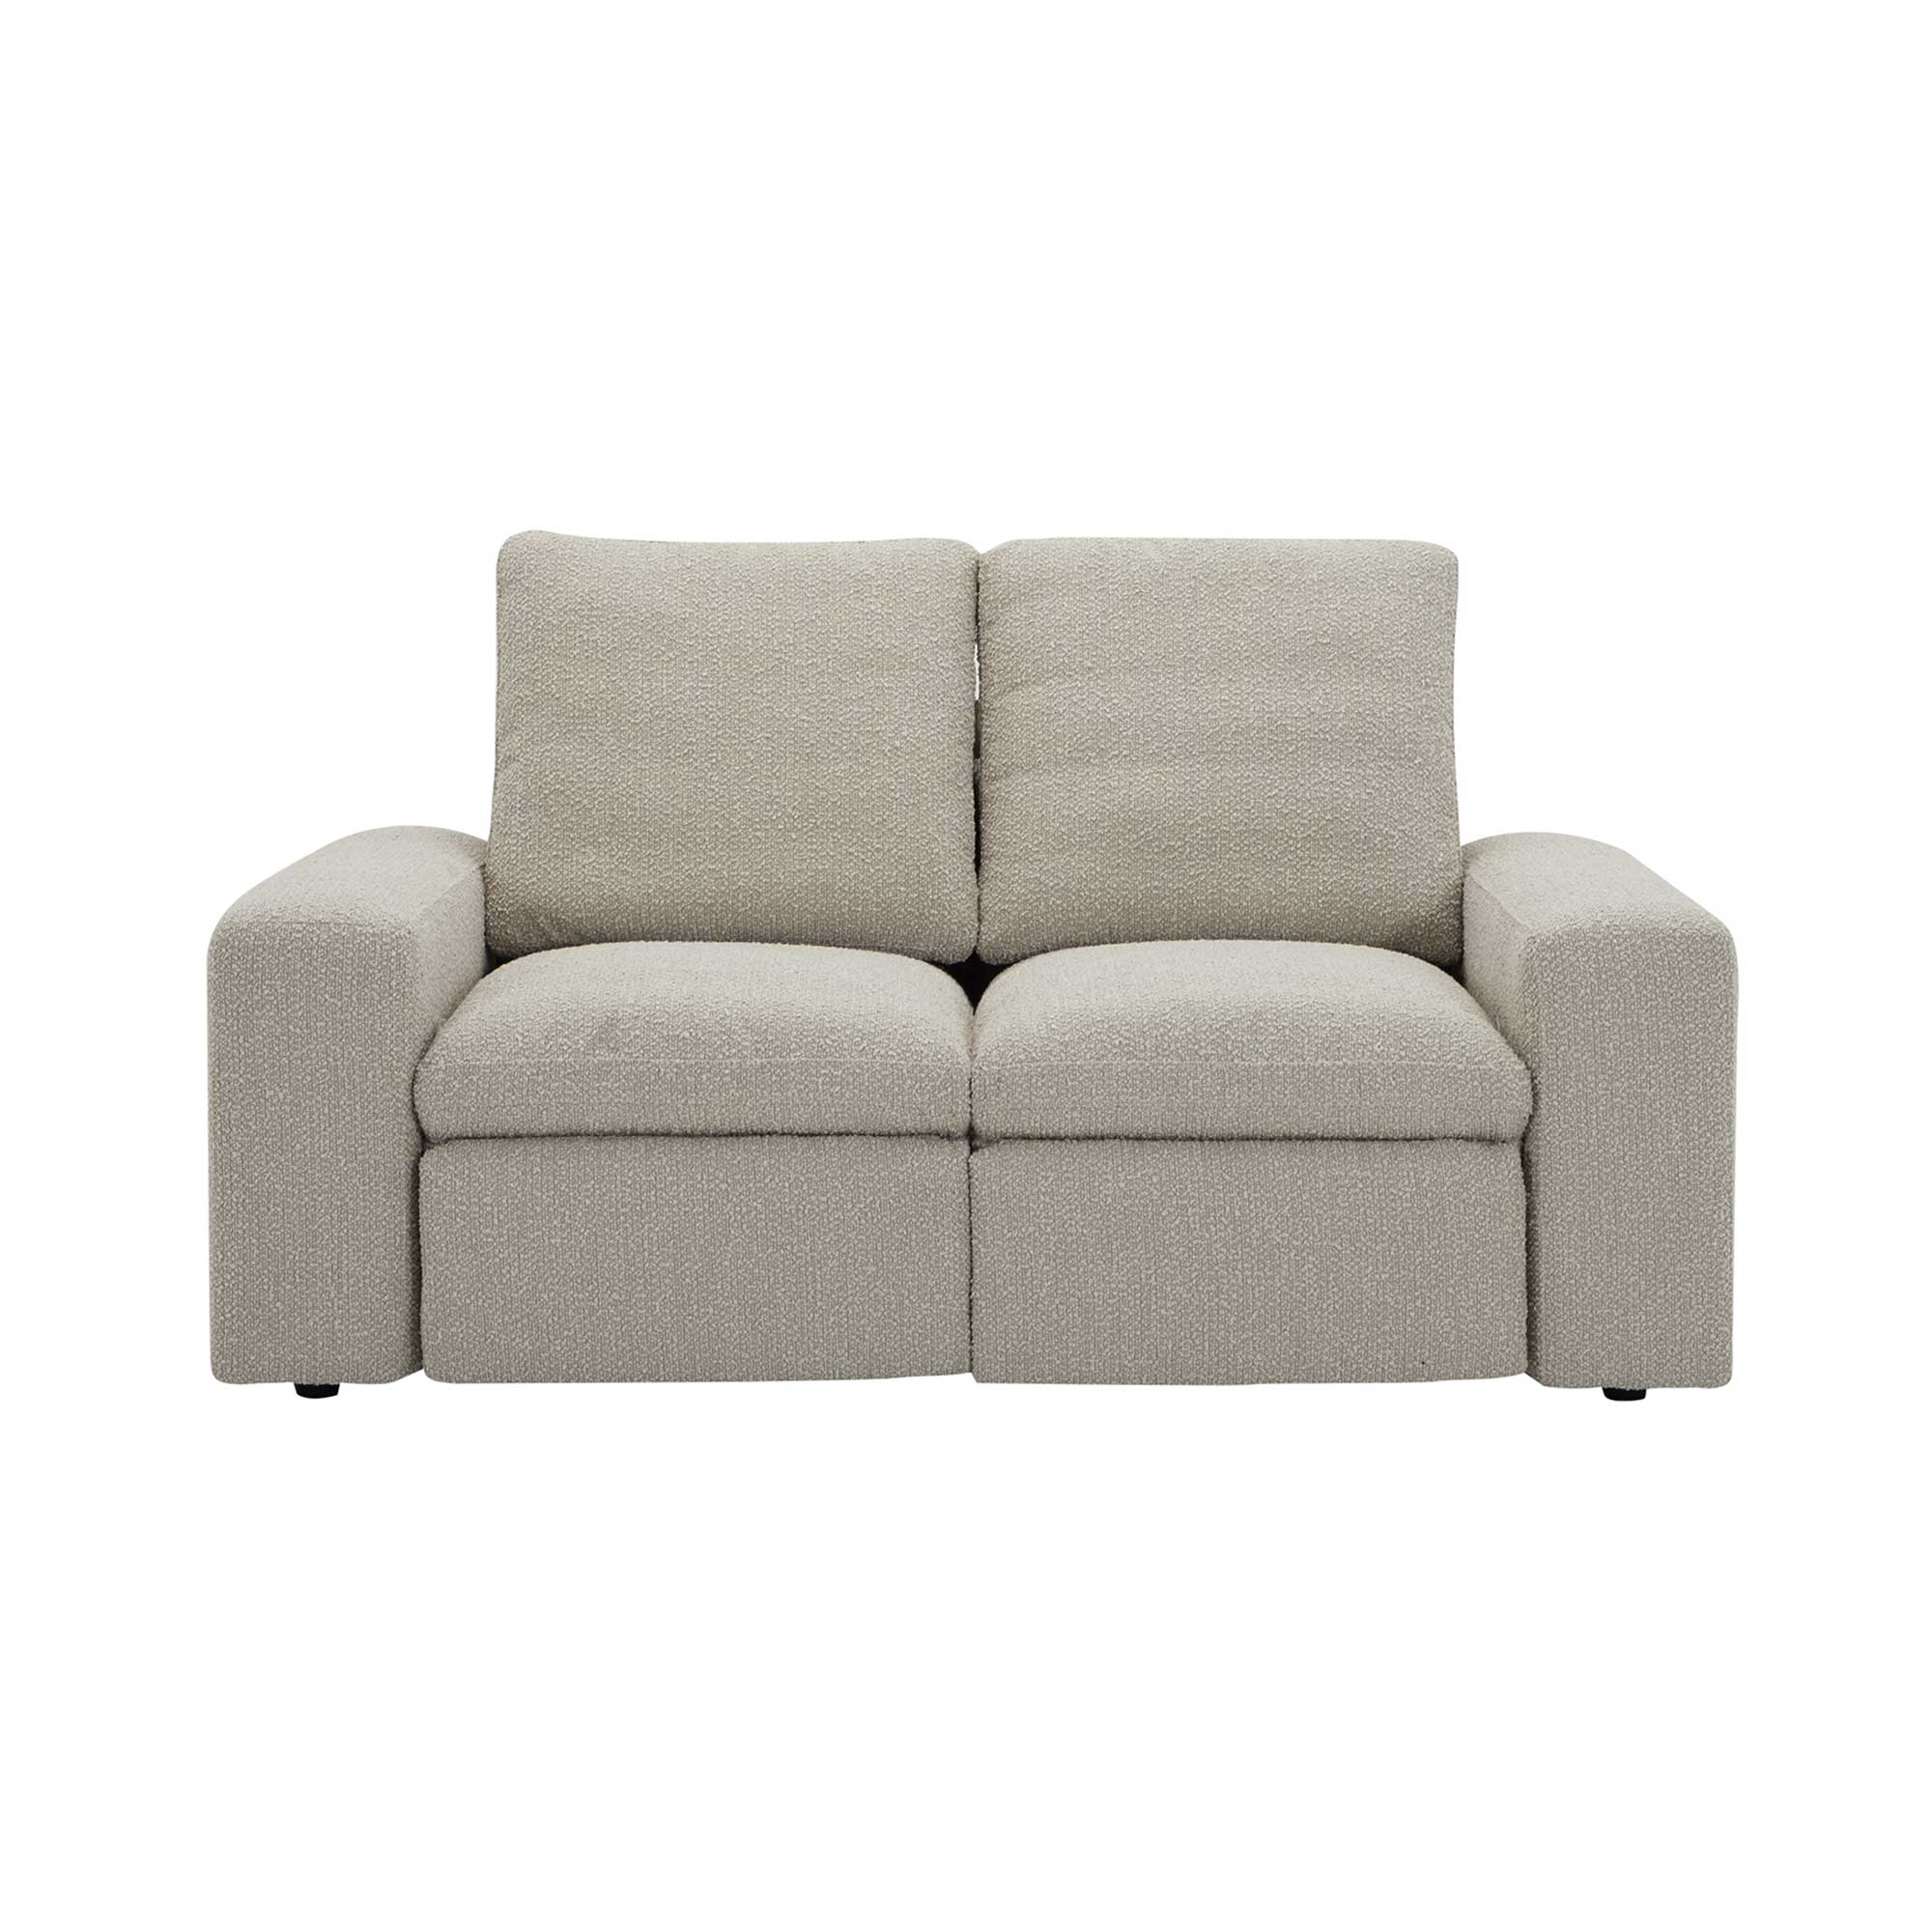 Thoreau Electric Recliner 2 Seater Recliner Sofa, Neutral Fabric | Barker & Stonehouse